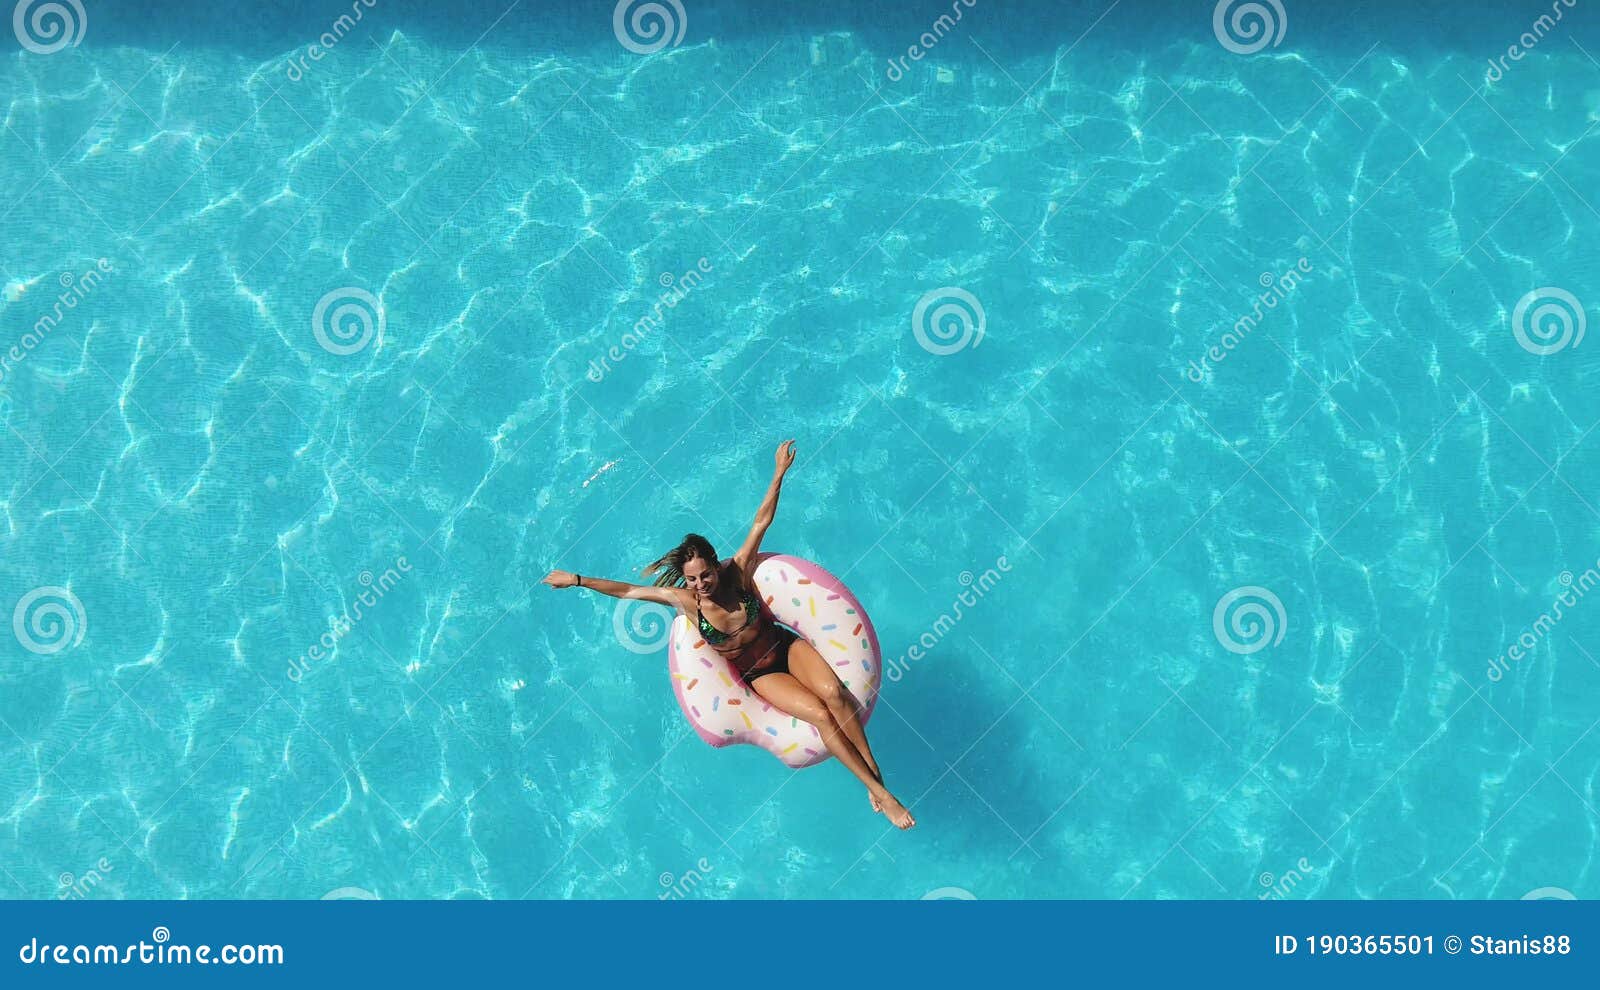 Girl in the Pool Swims on an Inflatable Donut of Pink Color Stock Image ...